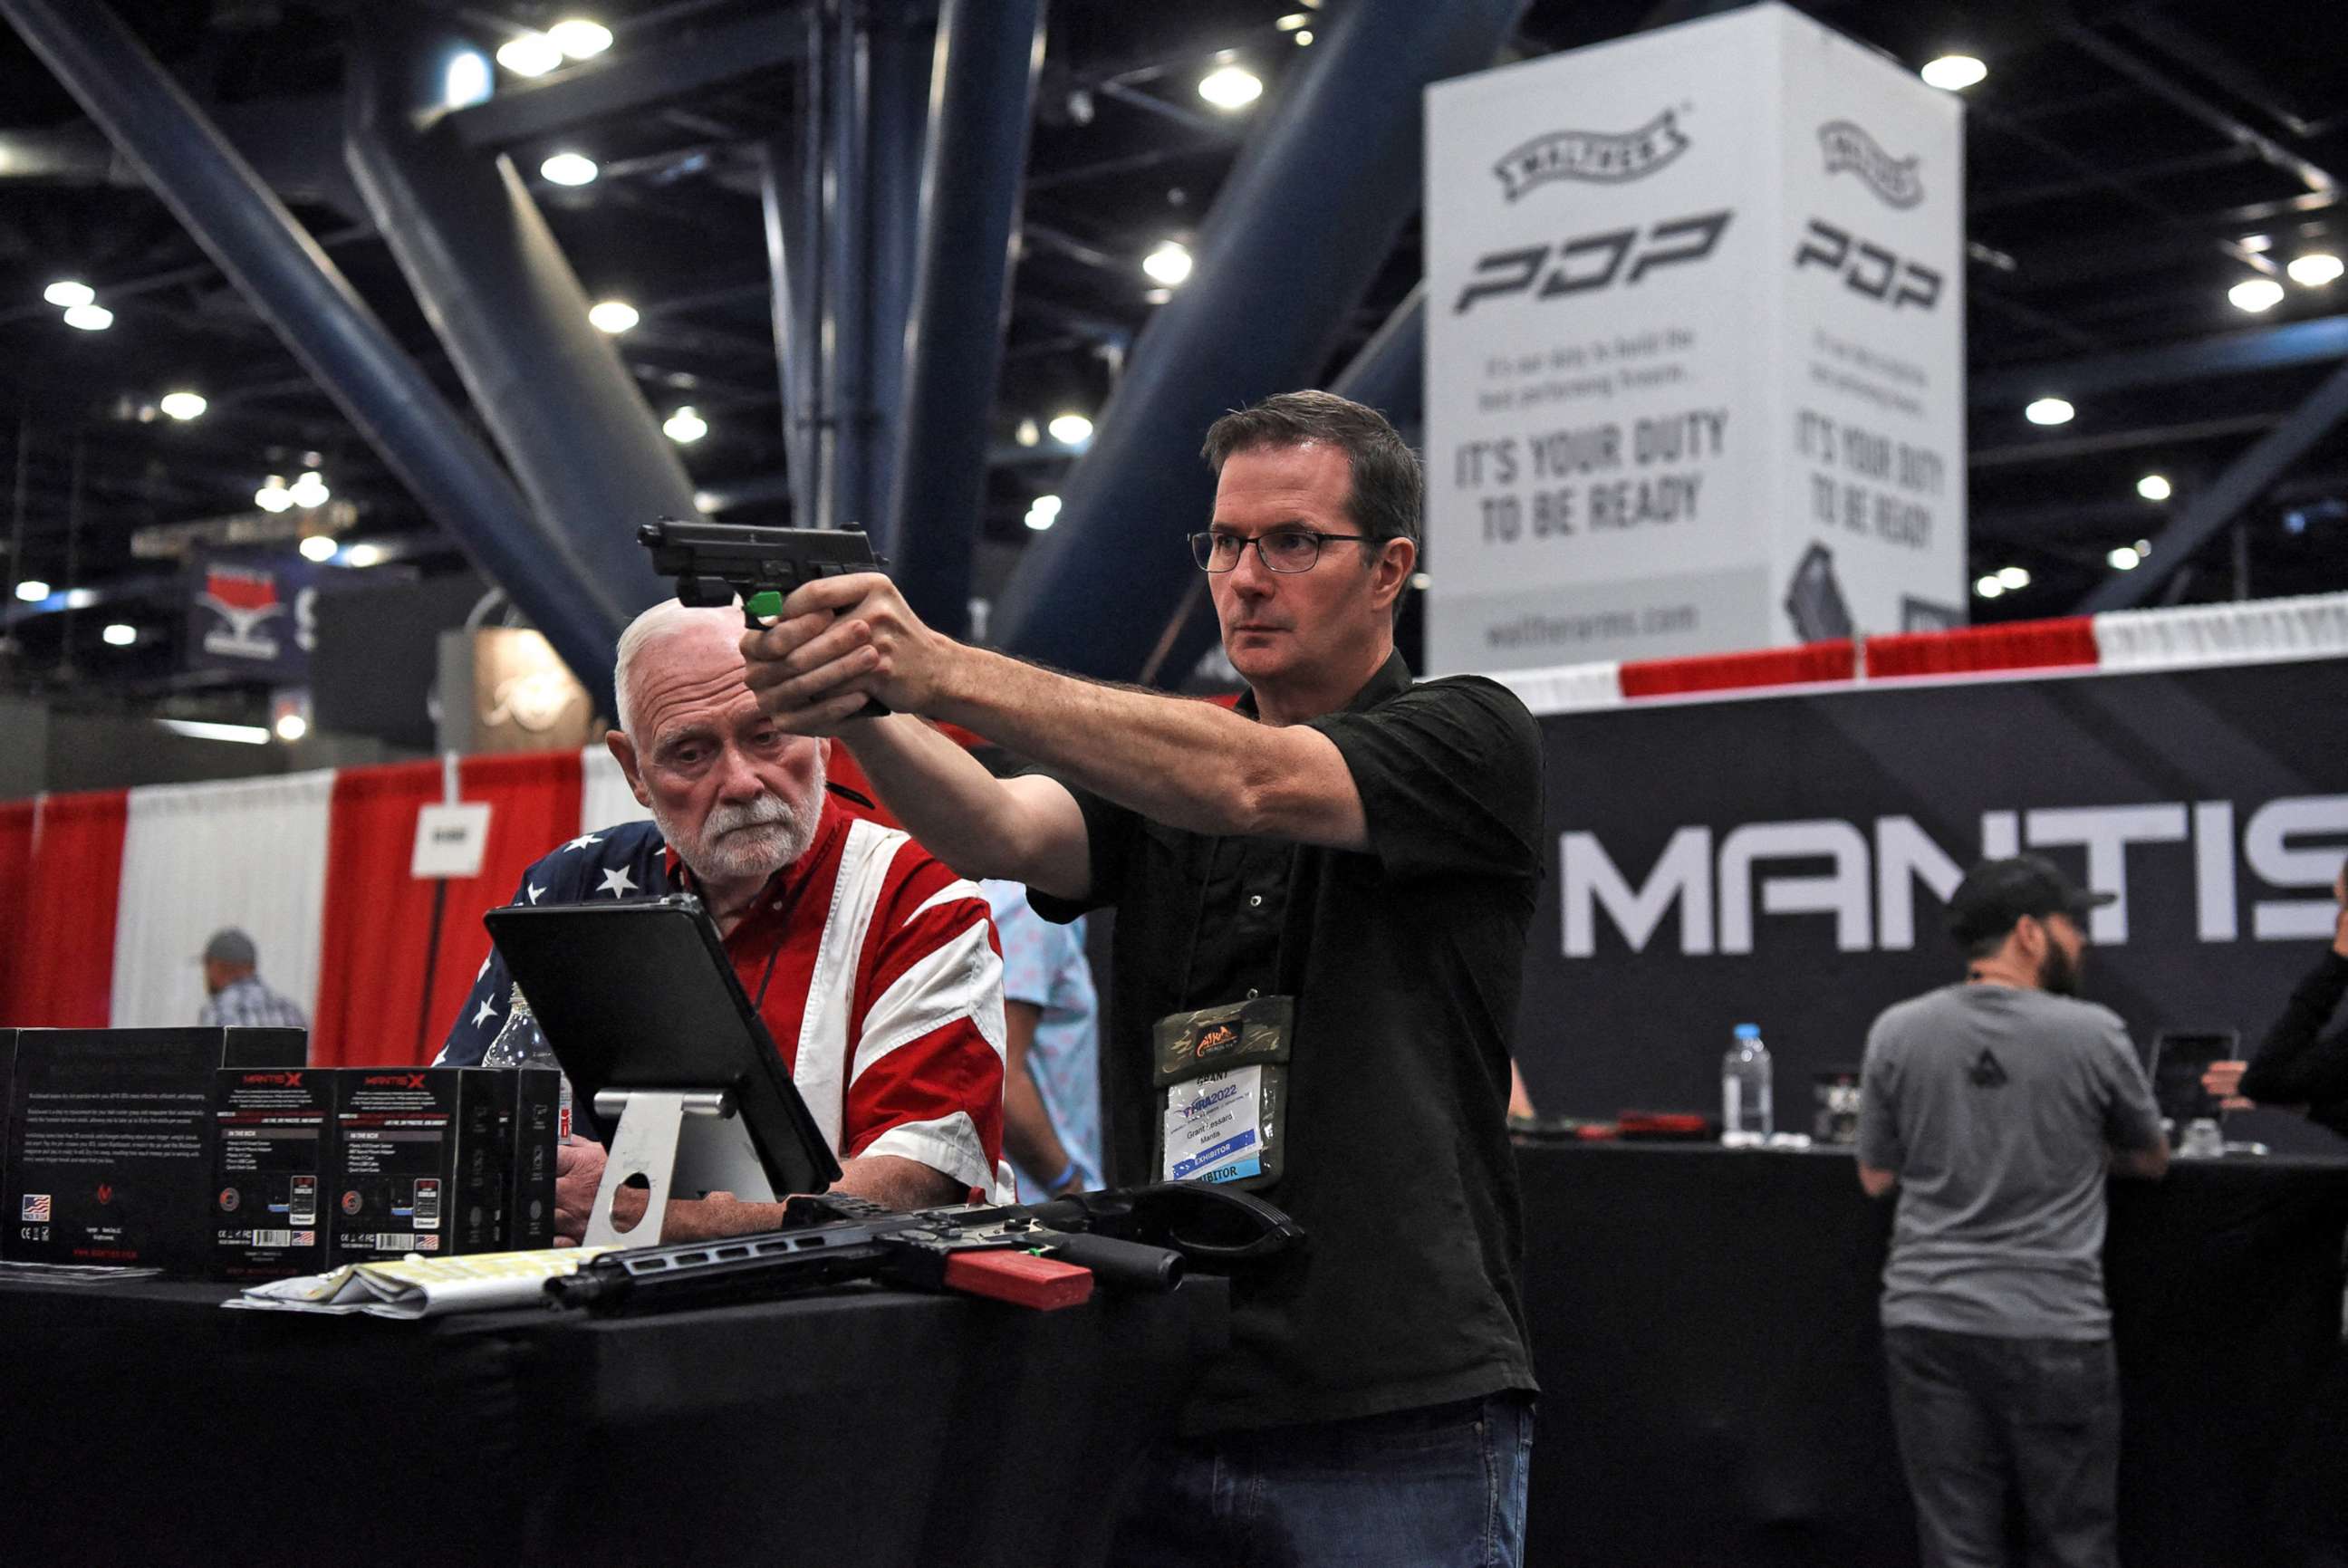 PHOTO: An attendee tries out a gun on display at the National Rifle Association (NRA) annual convention in Houston, May 29, 2022. 